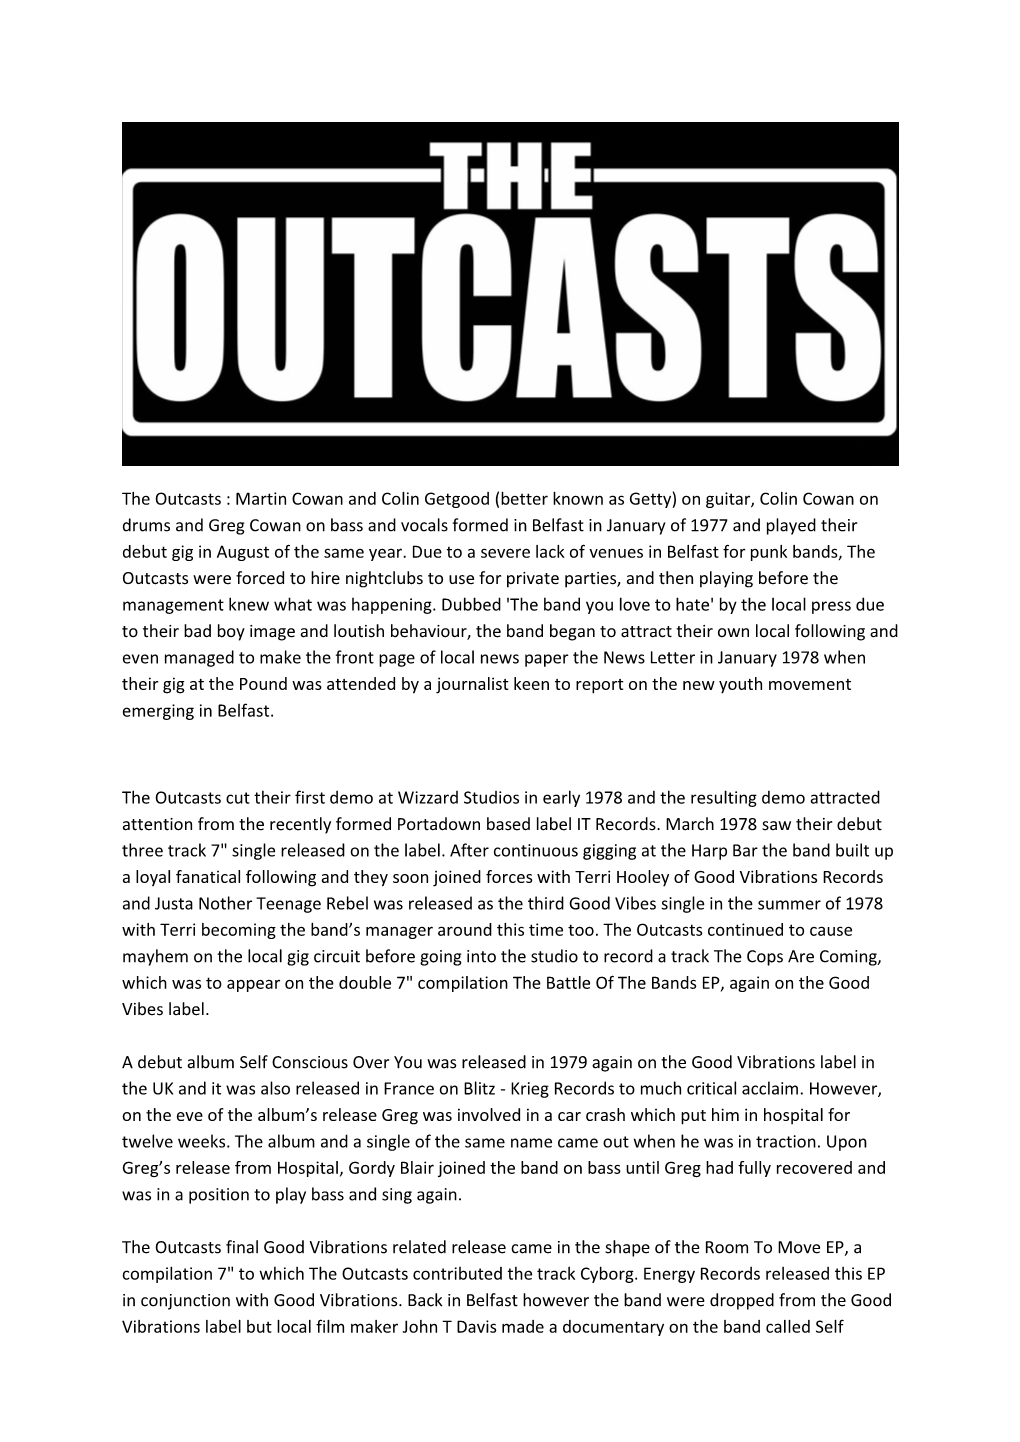 The Outcasts : Martin Cowan and Colin Getgood